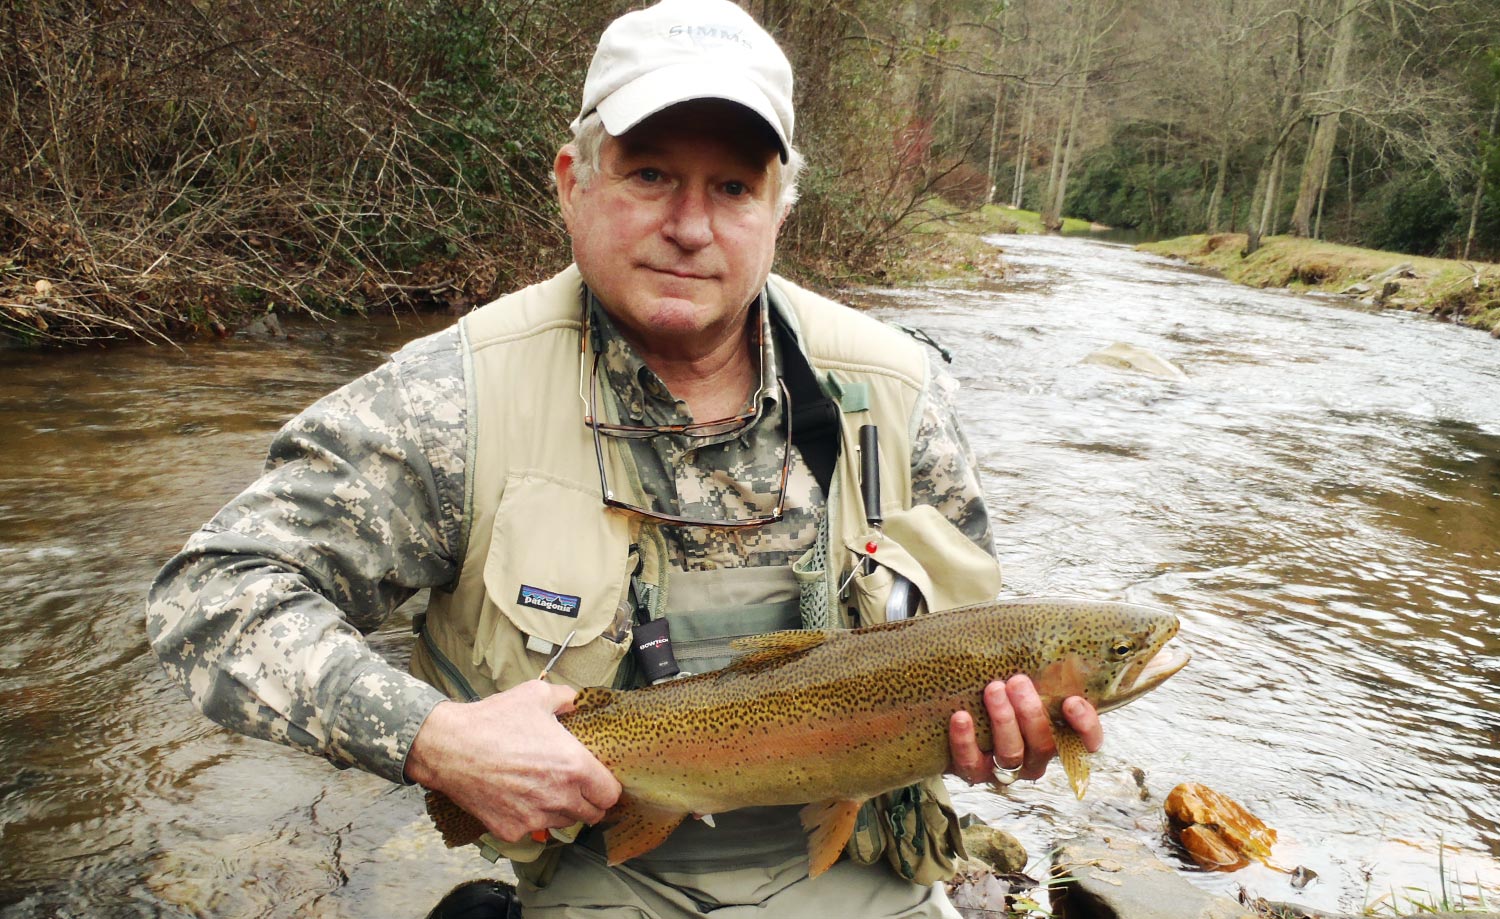 5 Tips For Better Dry Fly Fishing From Ronnie Hall | Fly Fishing | Gink and  Gasoline | How to Fly Fish | Trout Fishing | Fly Tying | Fly Fishing Blog